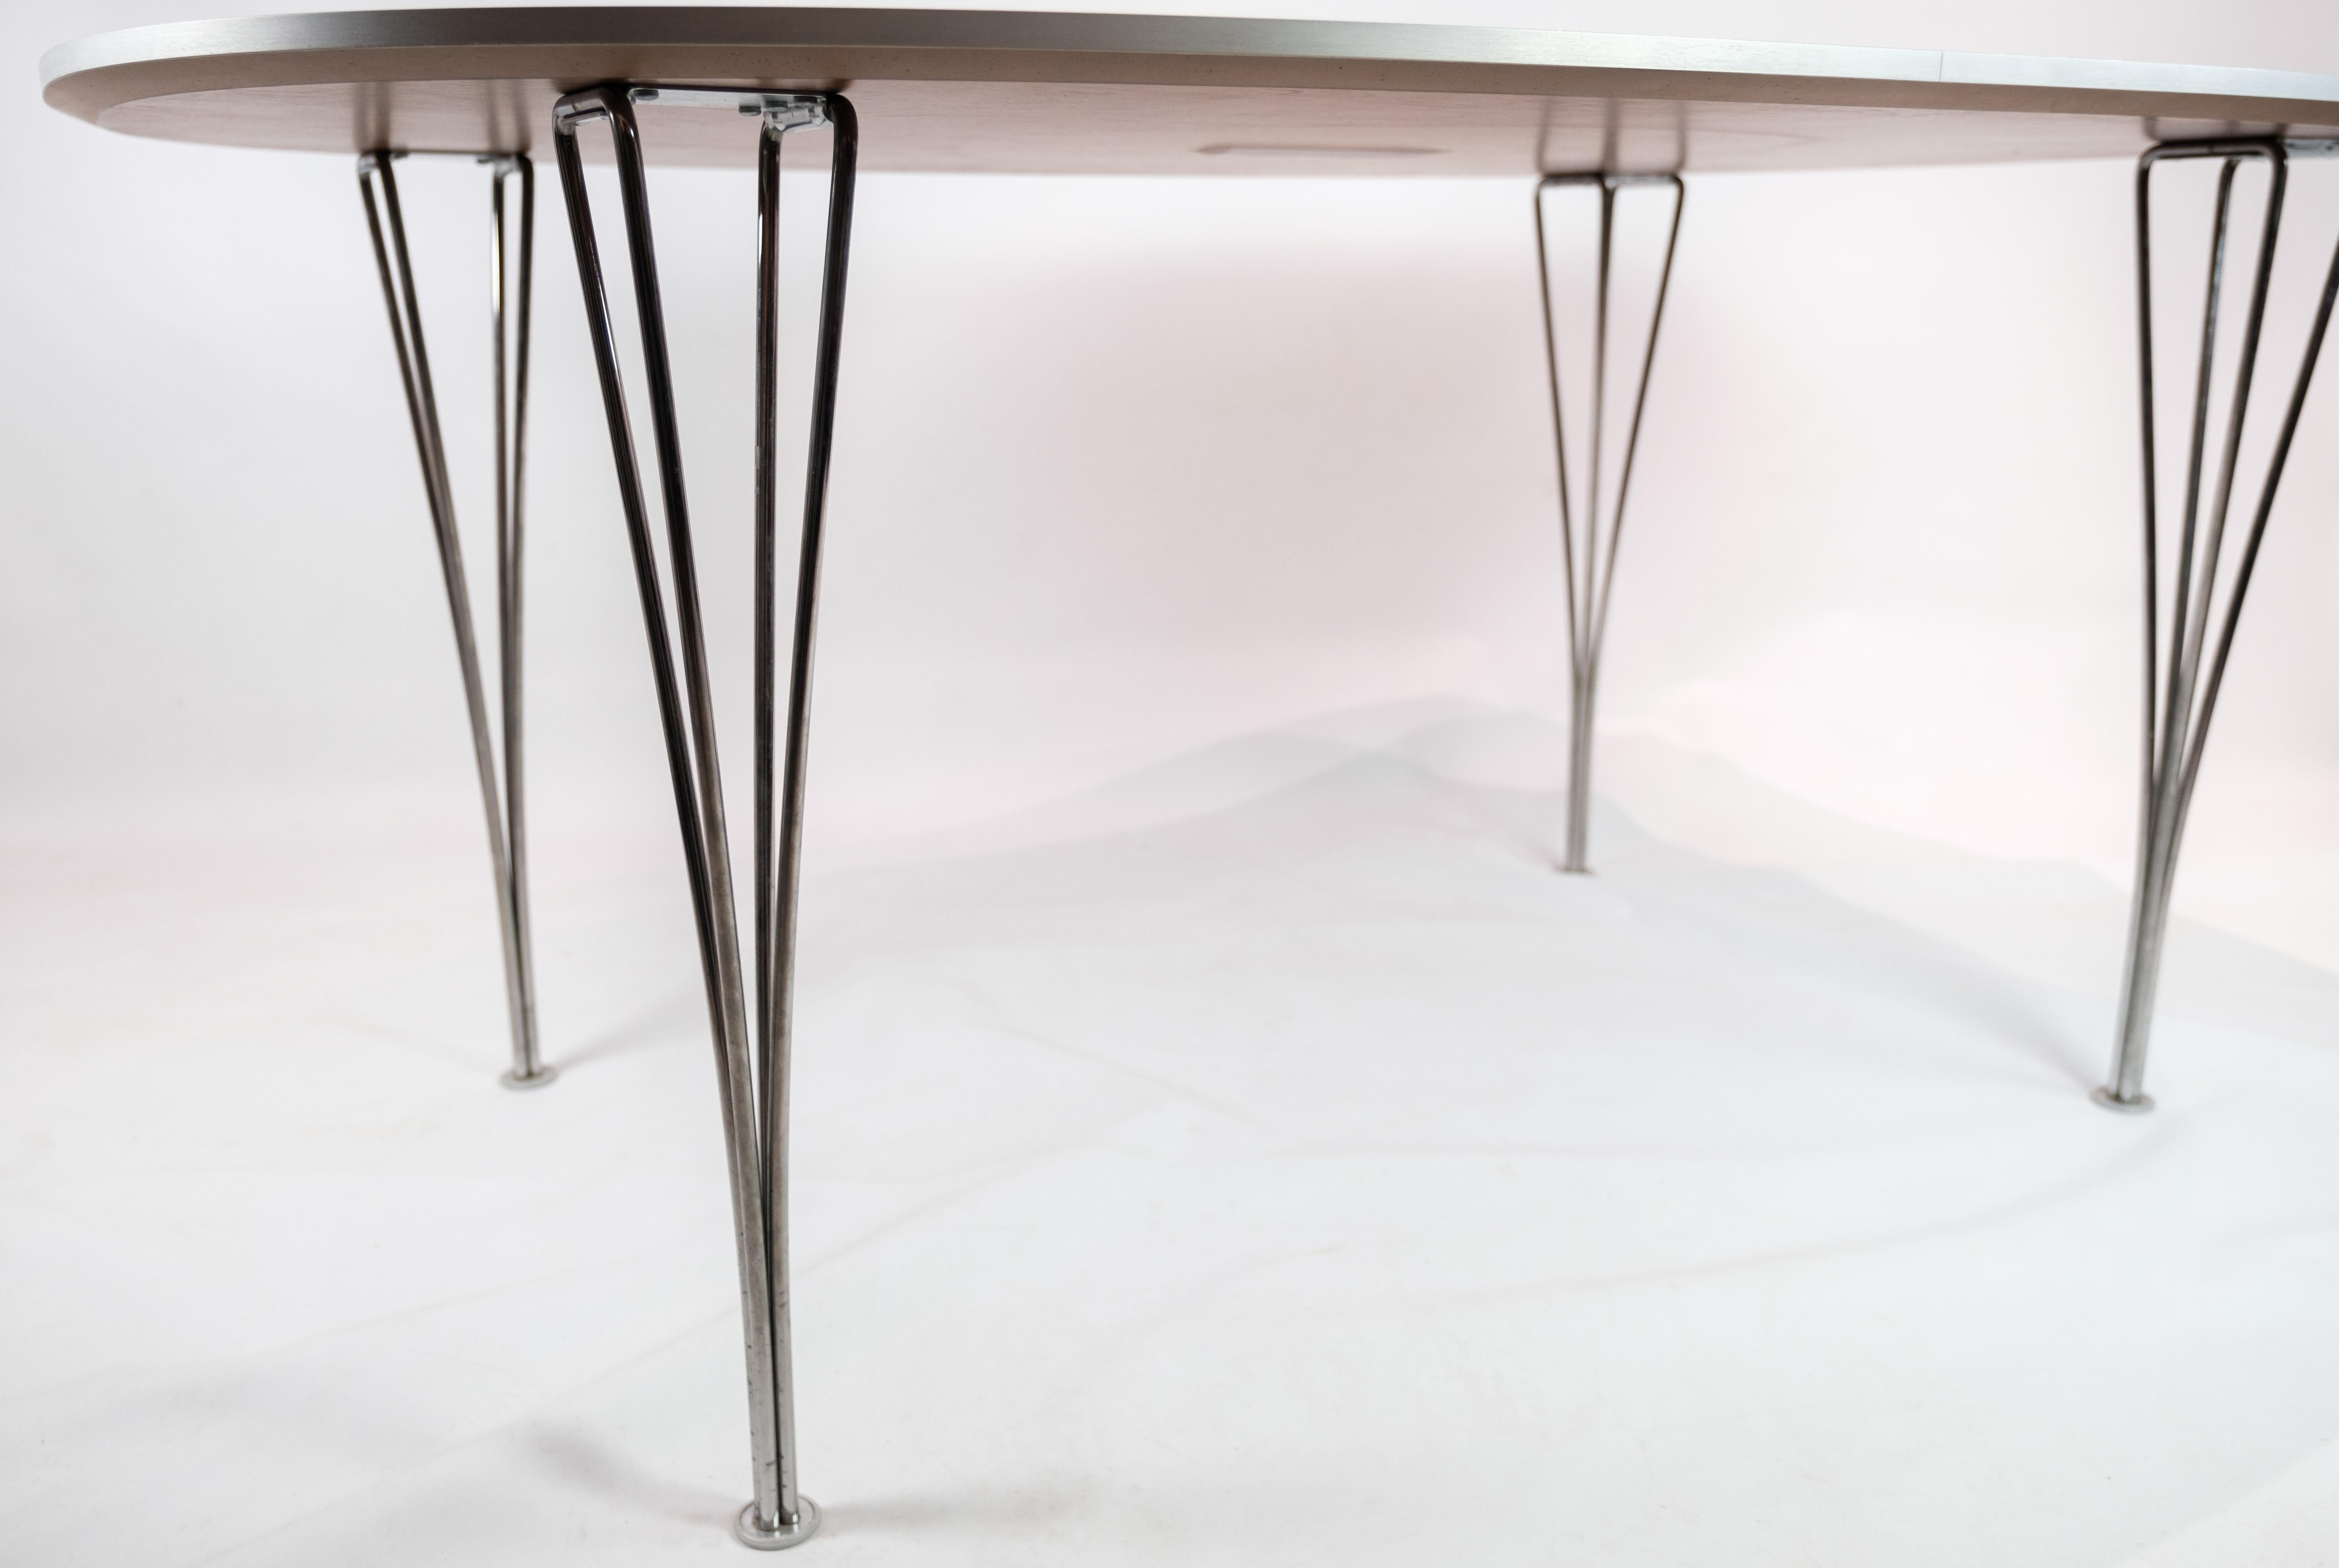 Mid-Century Modern Piet Hein Table, Model B612 with Walnut Surface and Steel Legs